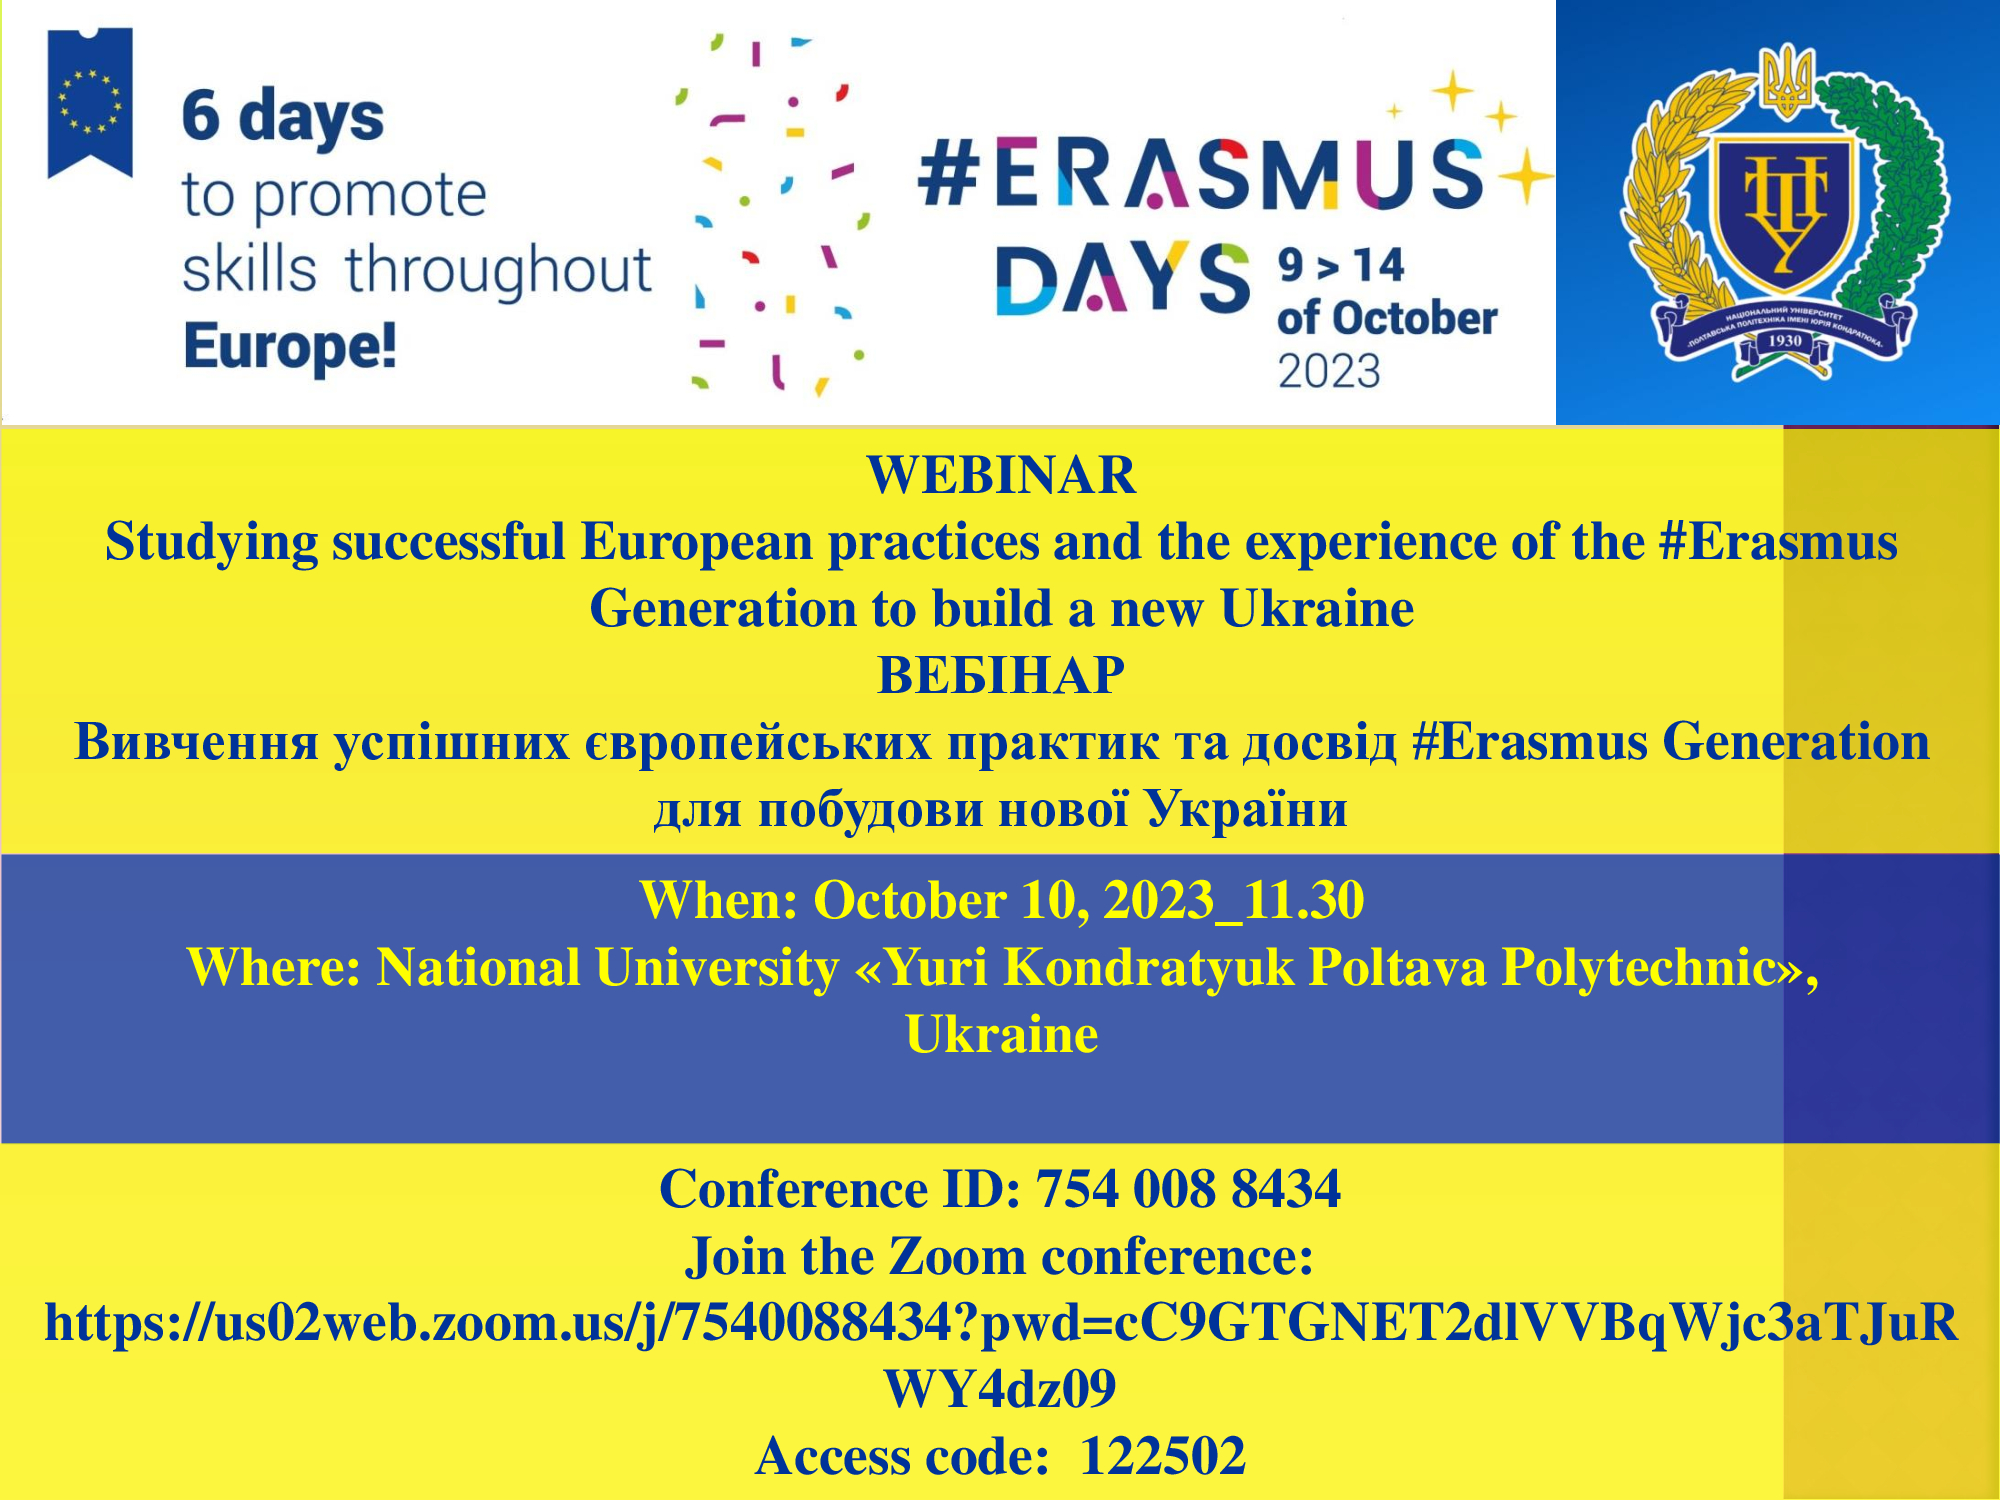 Polytechnic scientists are to share the European experience of the Erasmus generation to build a new Ukraine